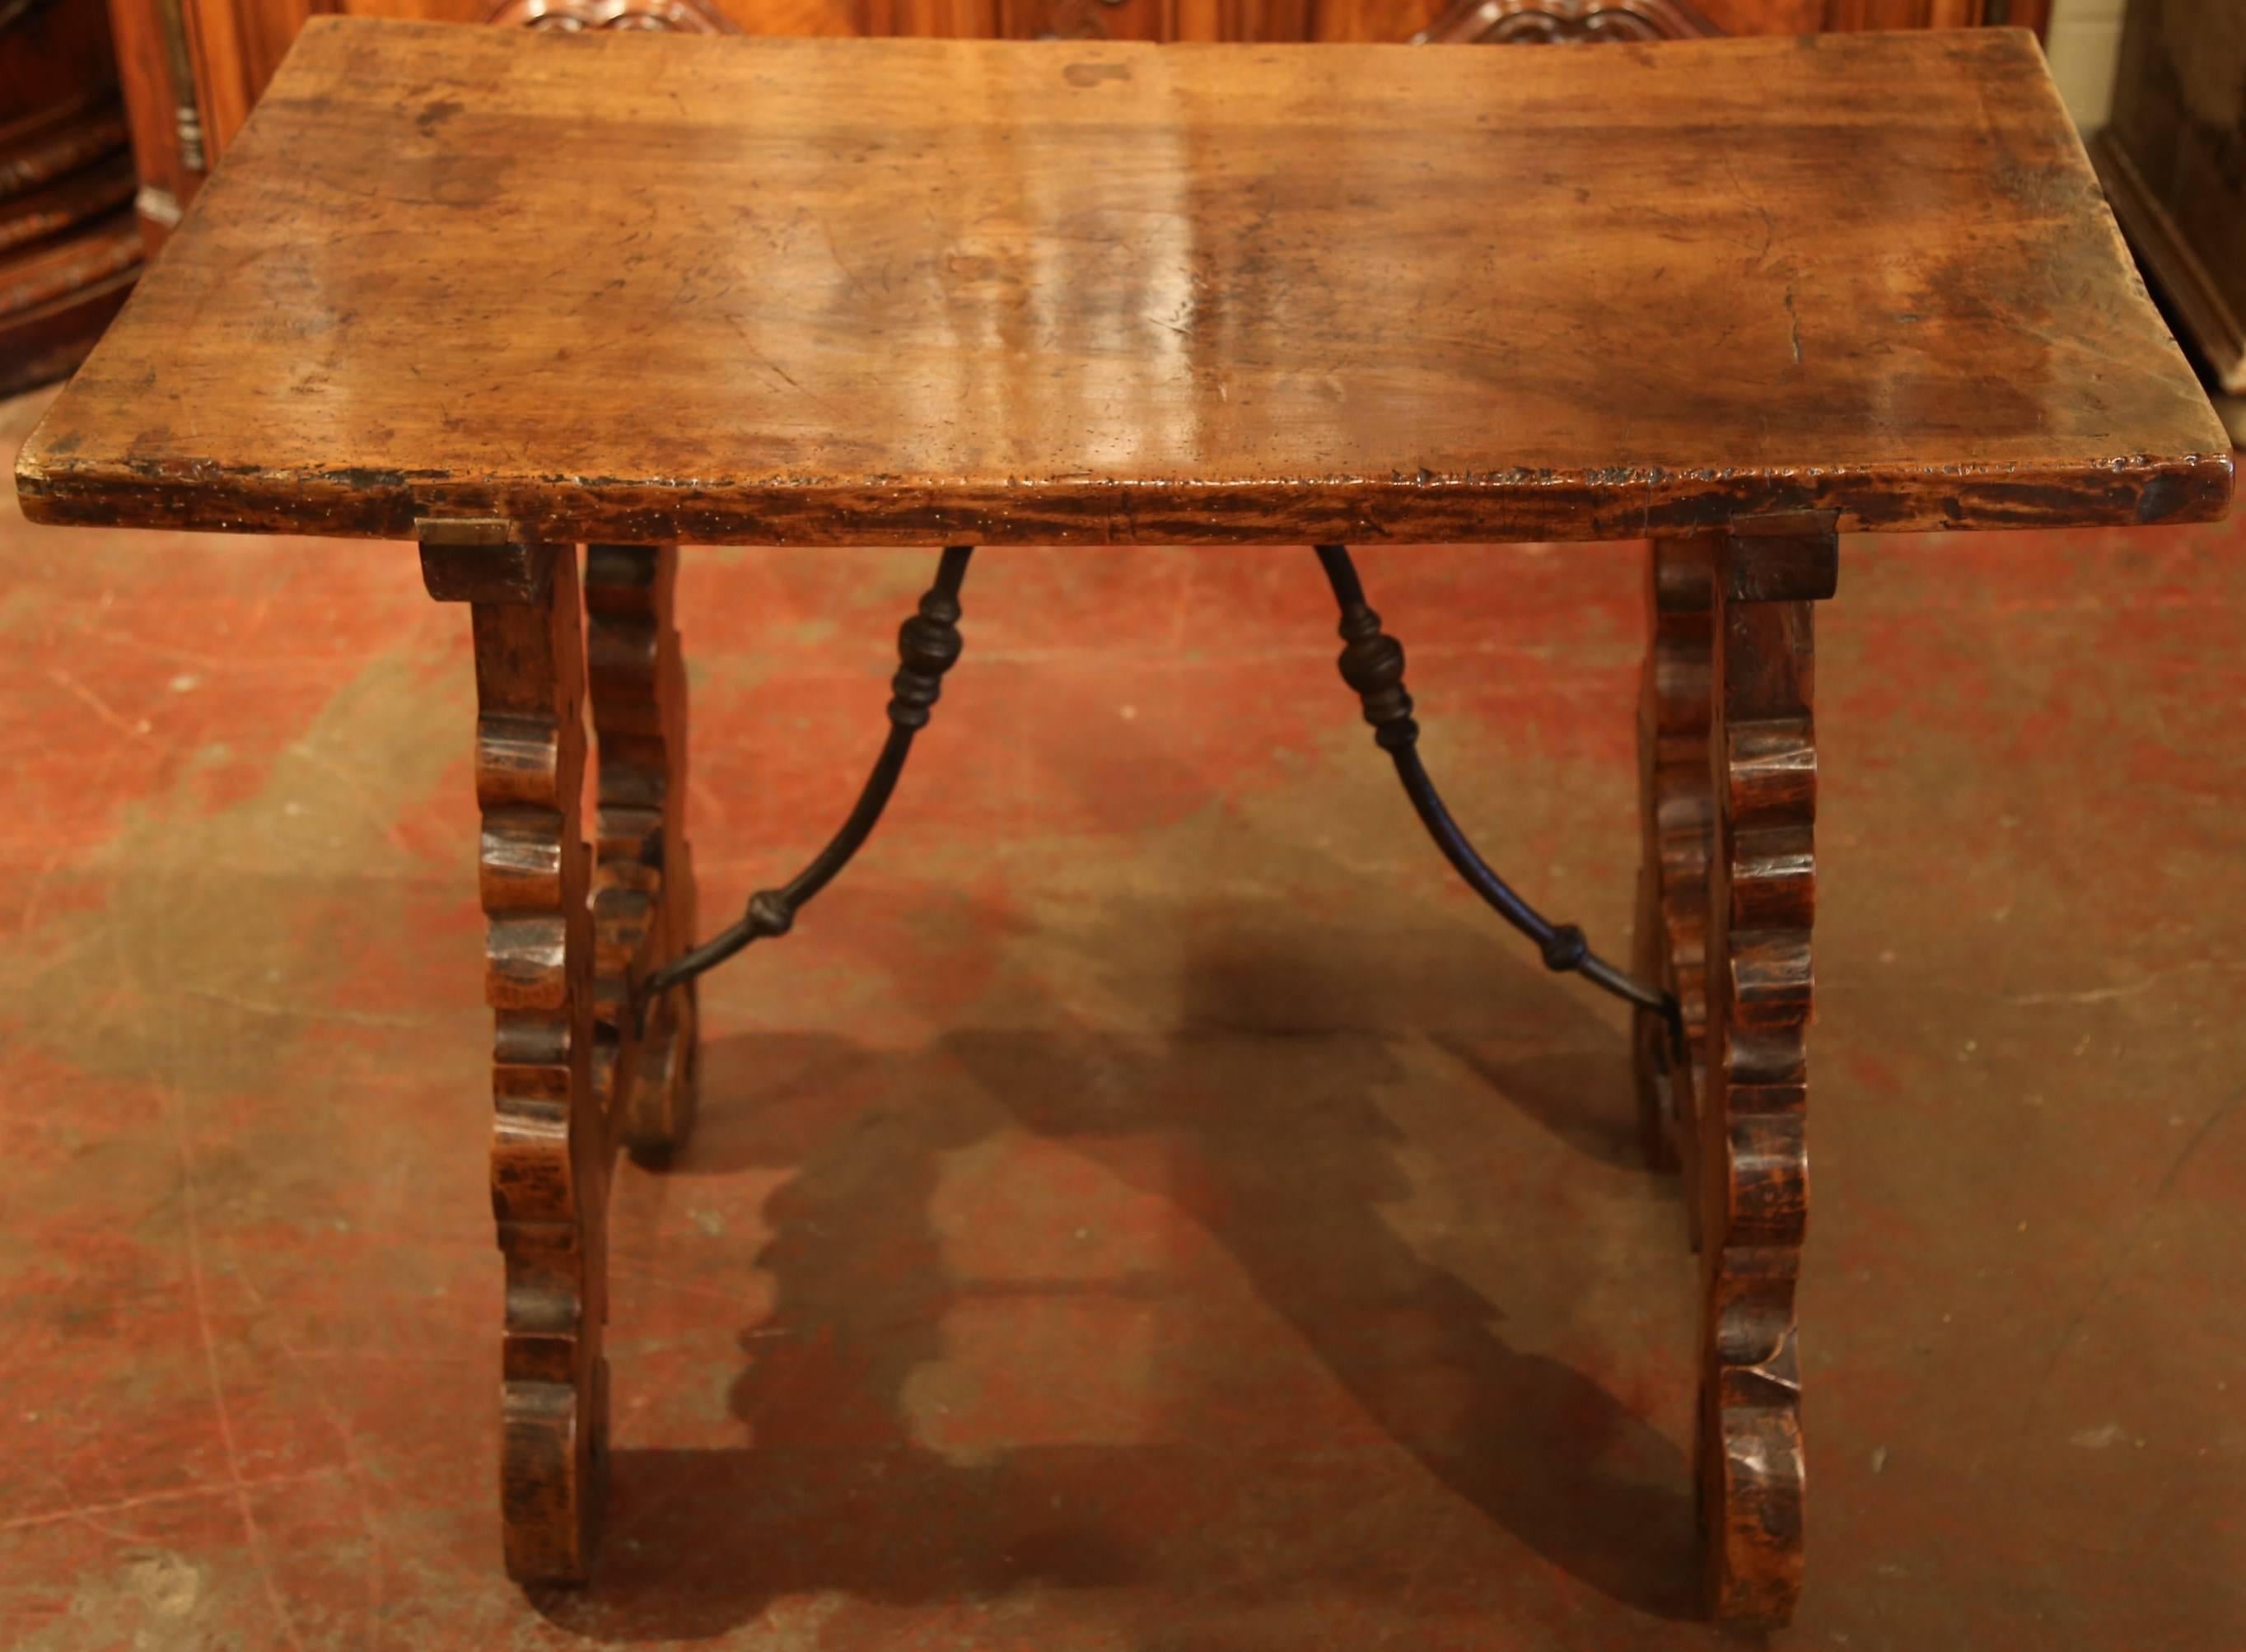 Gothic Mid-18th Century Spanish Walnut Table with Iron Stretcher and Single Plank Top